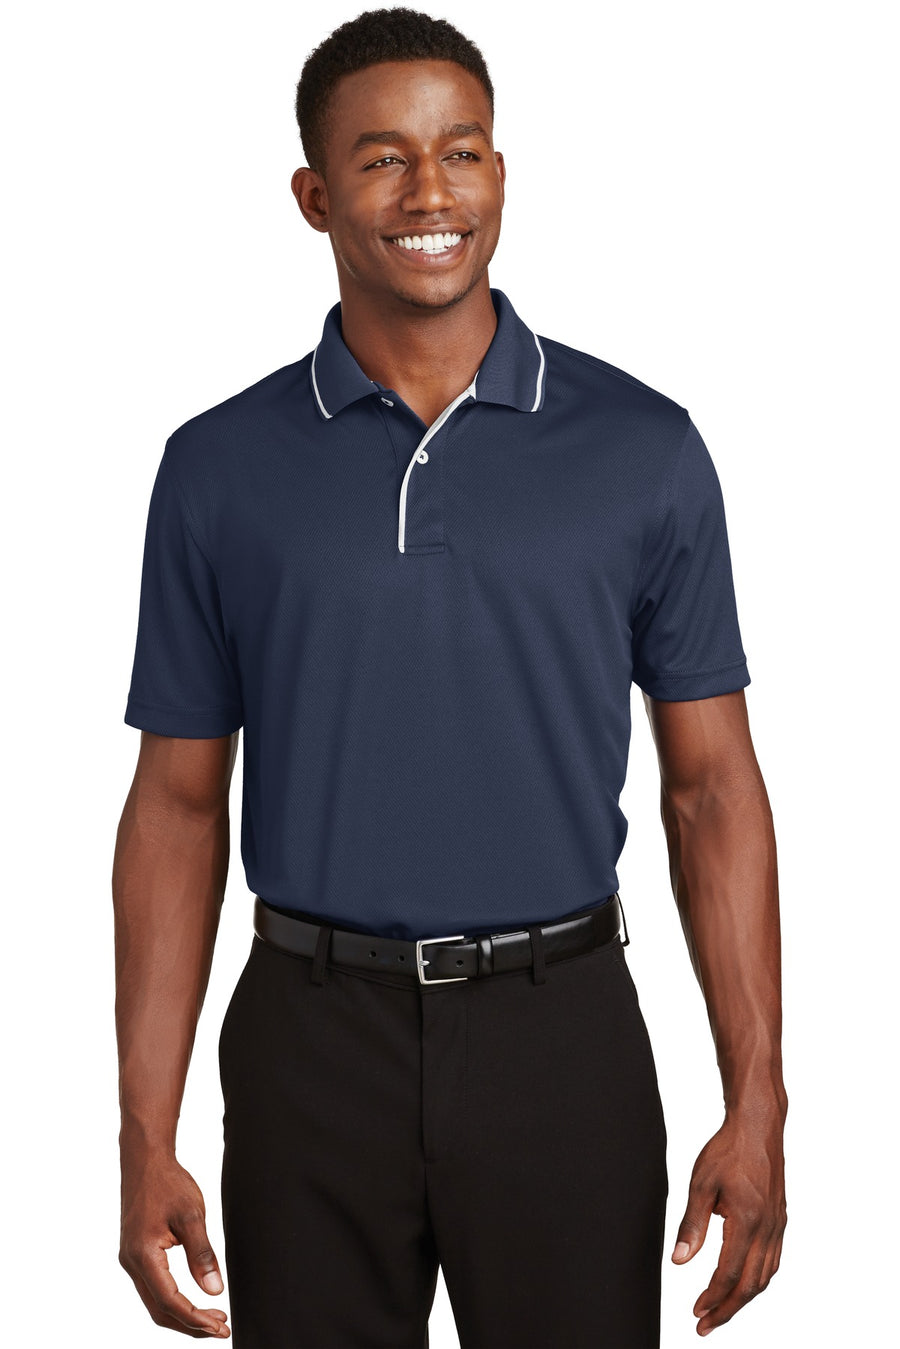 Sport-Tek Dri-Mesh Polo with Tipped Collar and Piping.